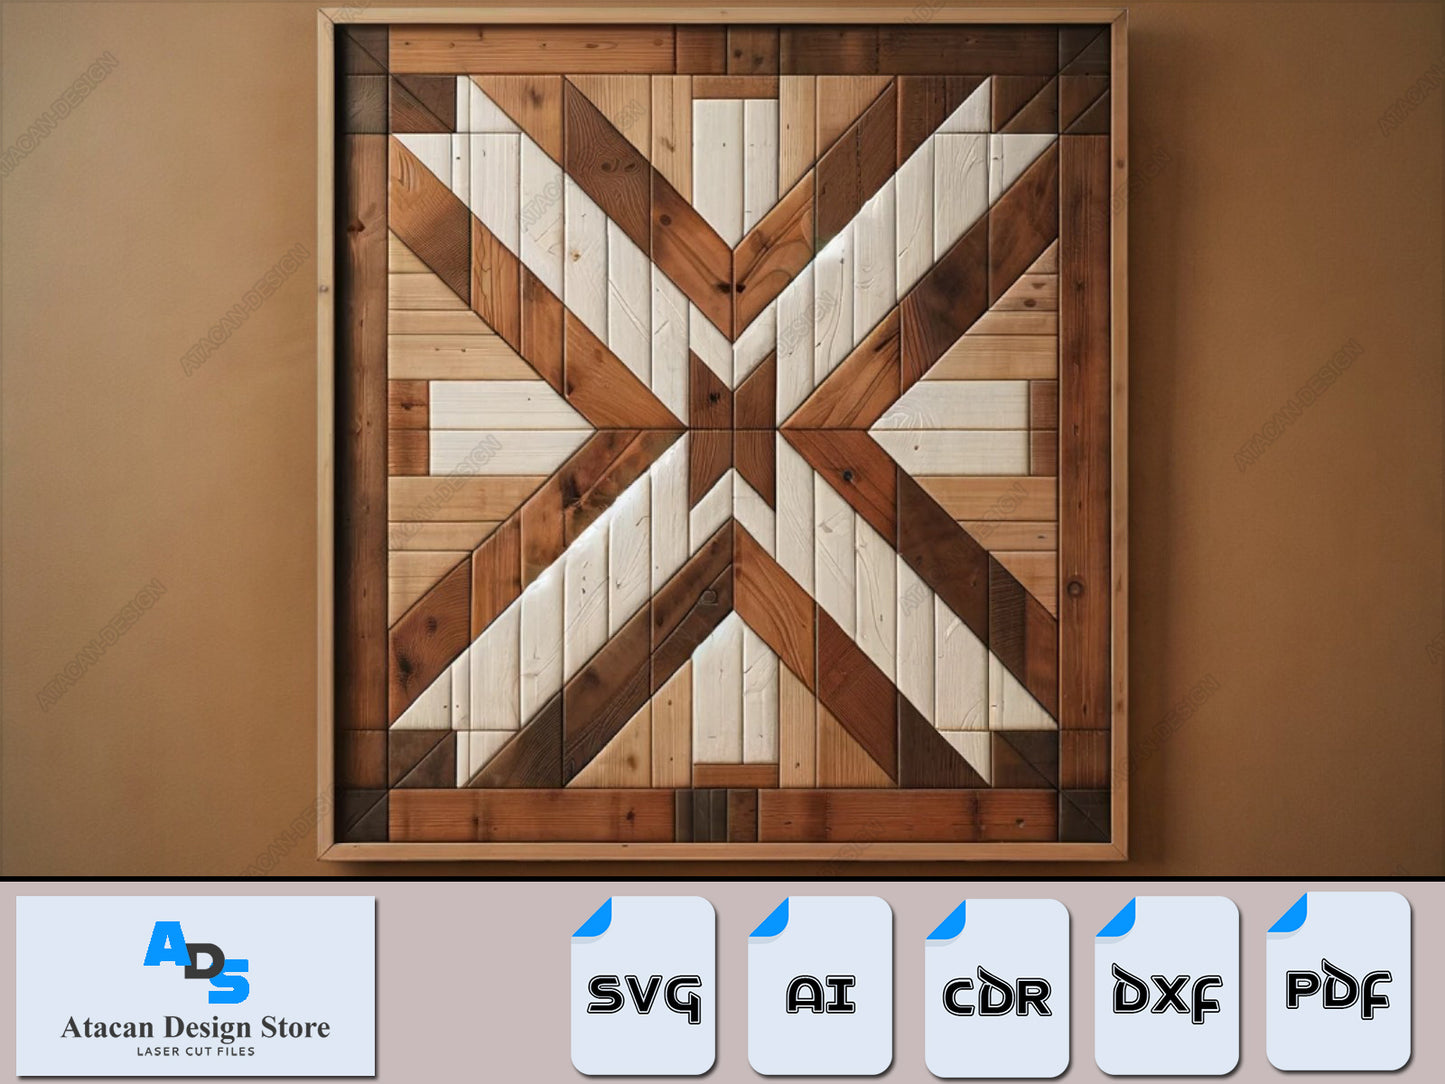 Rustic Charm Barn Quilt Patterns Bundle - Premium Svg, Dxf ,Pdf, Ai, Cdr Files for Laser Cutting 403